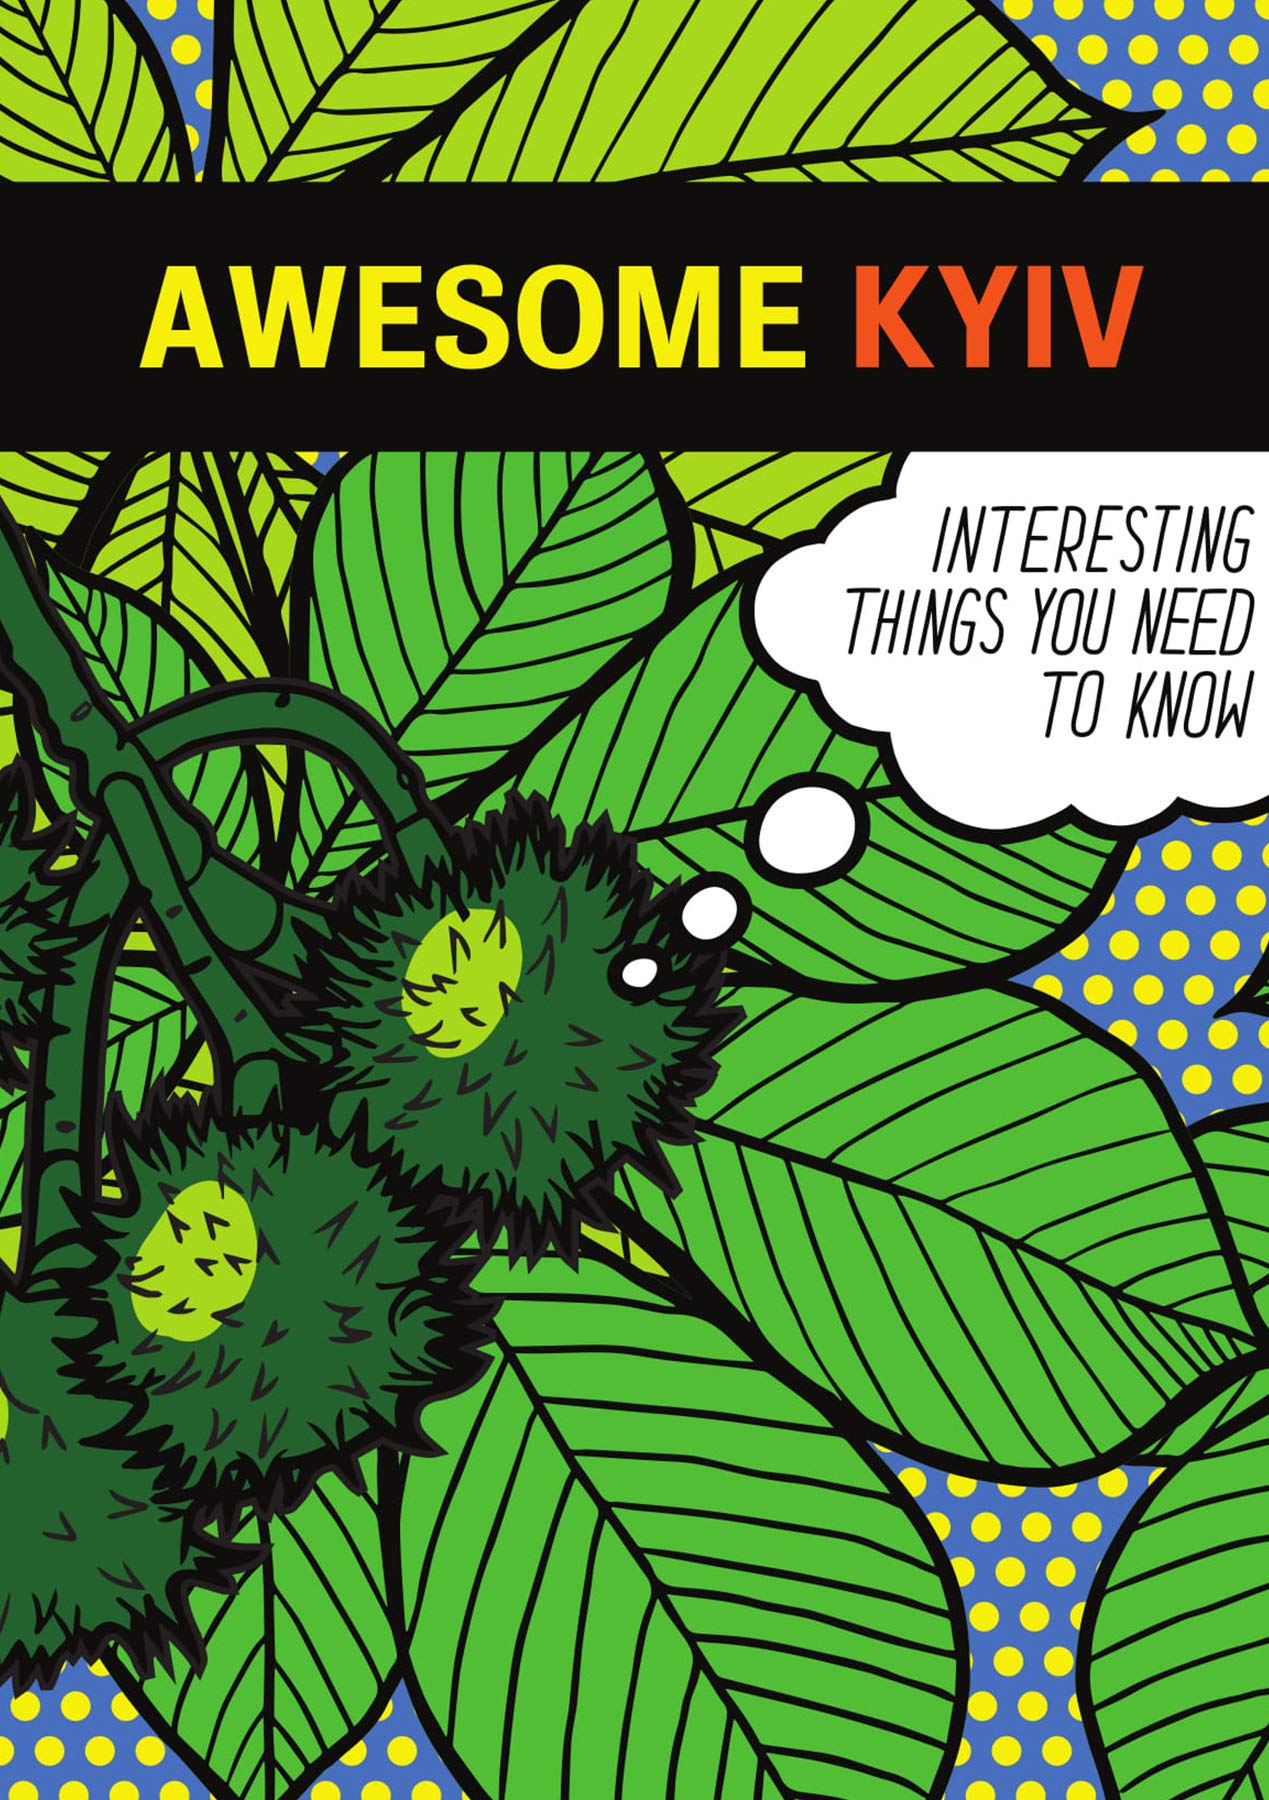 Awesome Kyiv: Interesting Things You Need To Know - A Ukraine Travel Guide